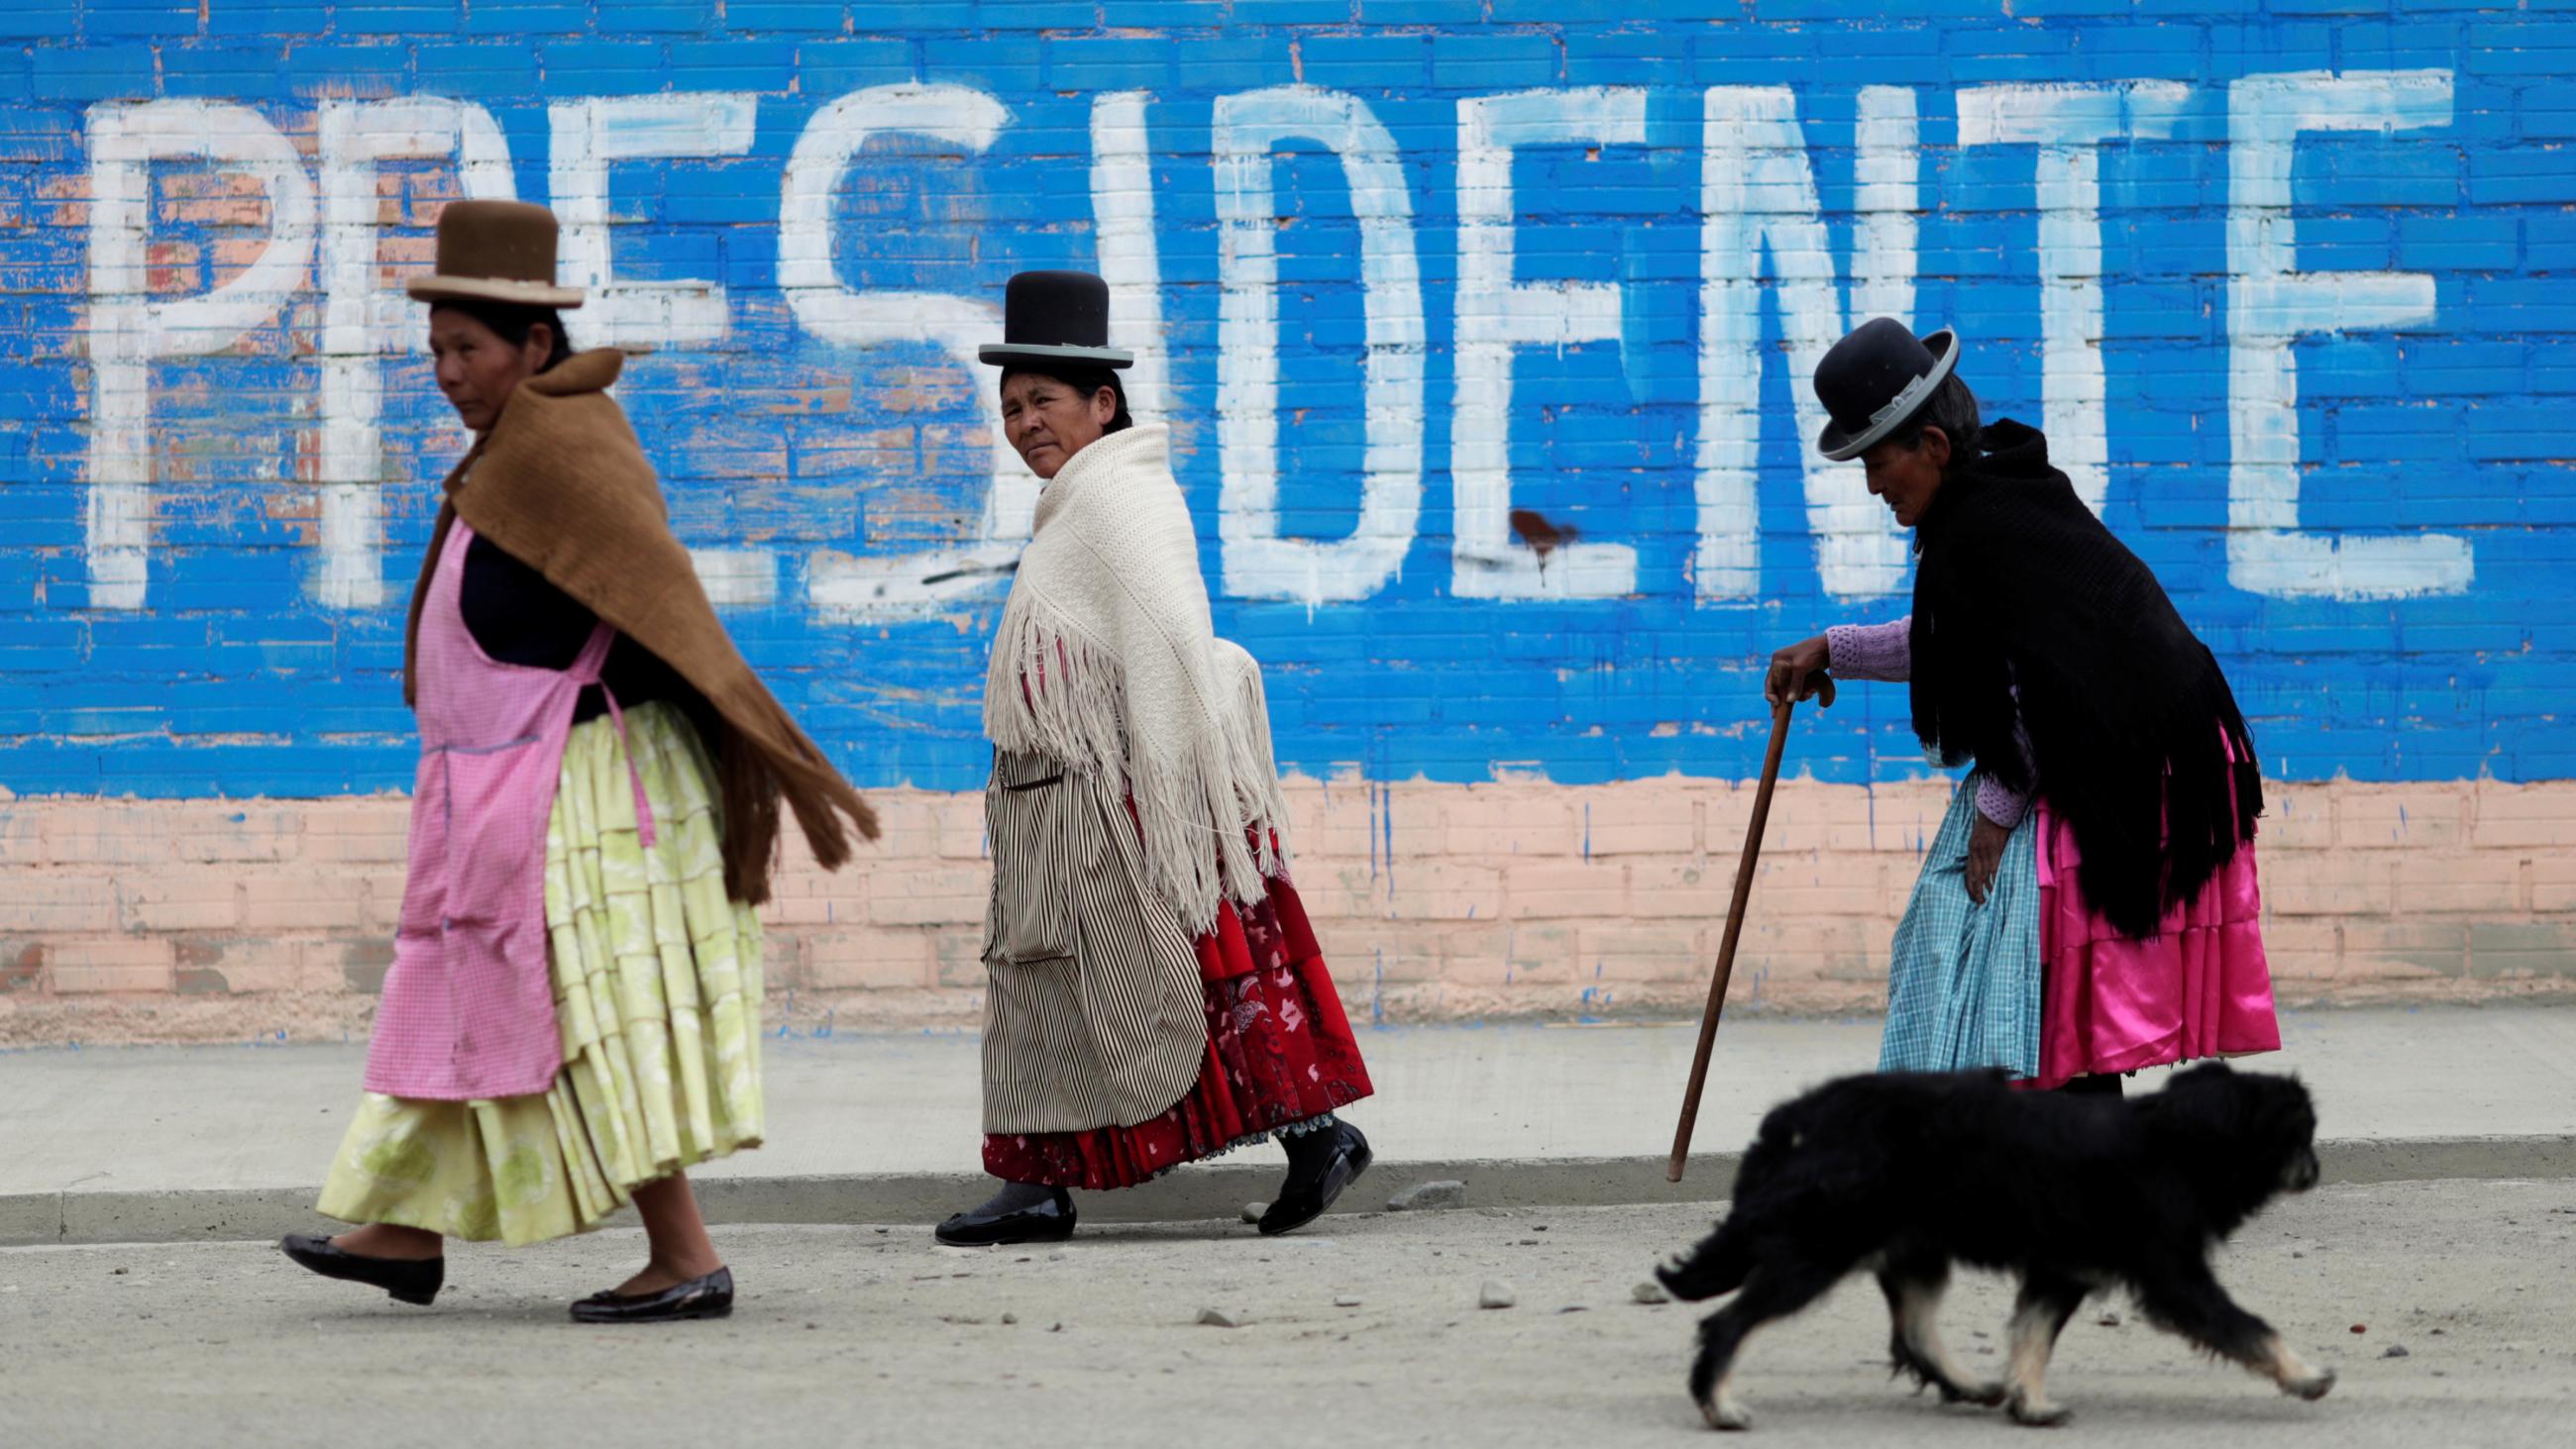 Older Bolivian women walk past wall art that reads, "Presidente," after voting at a polling station during the presidential election in La Paz, Bolivia, on October 18, 2020.